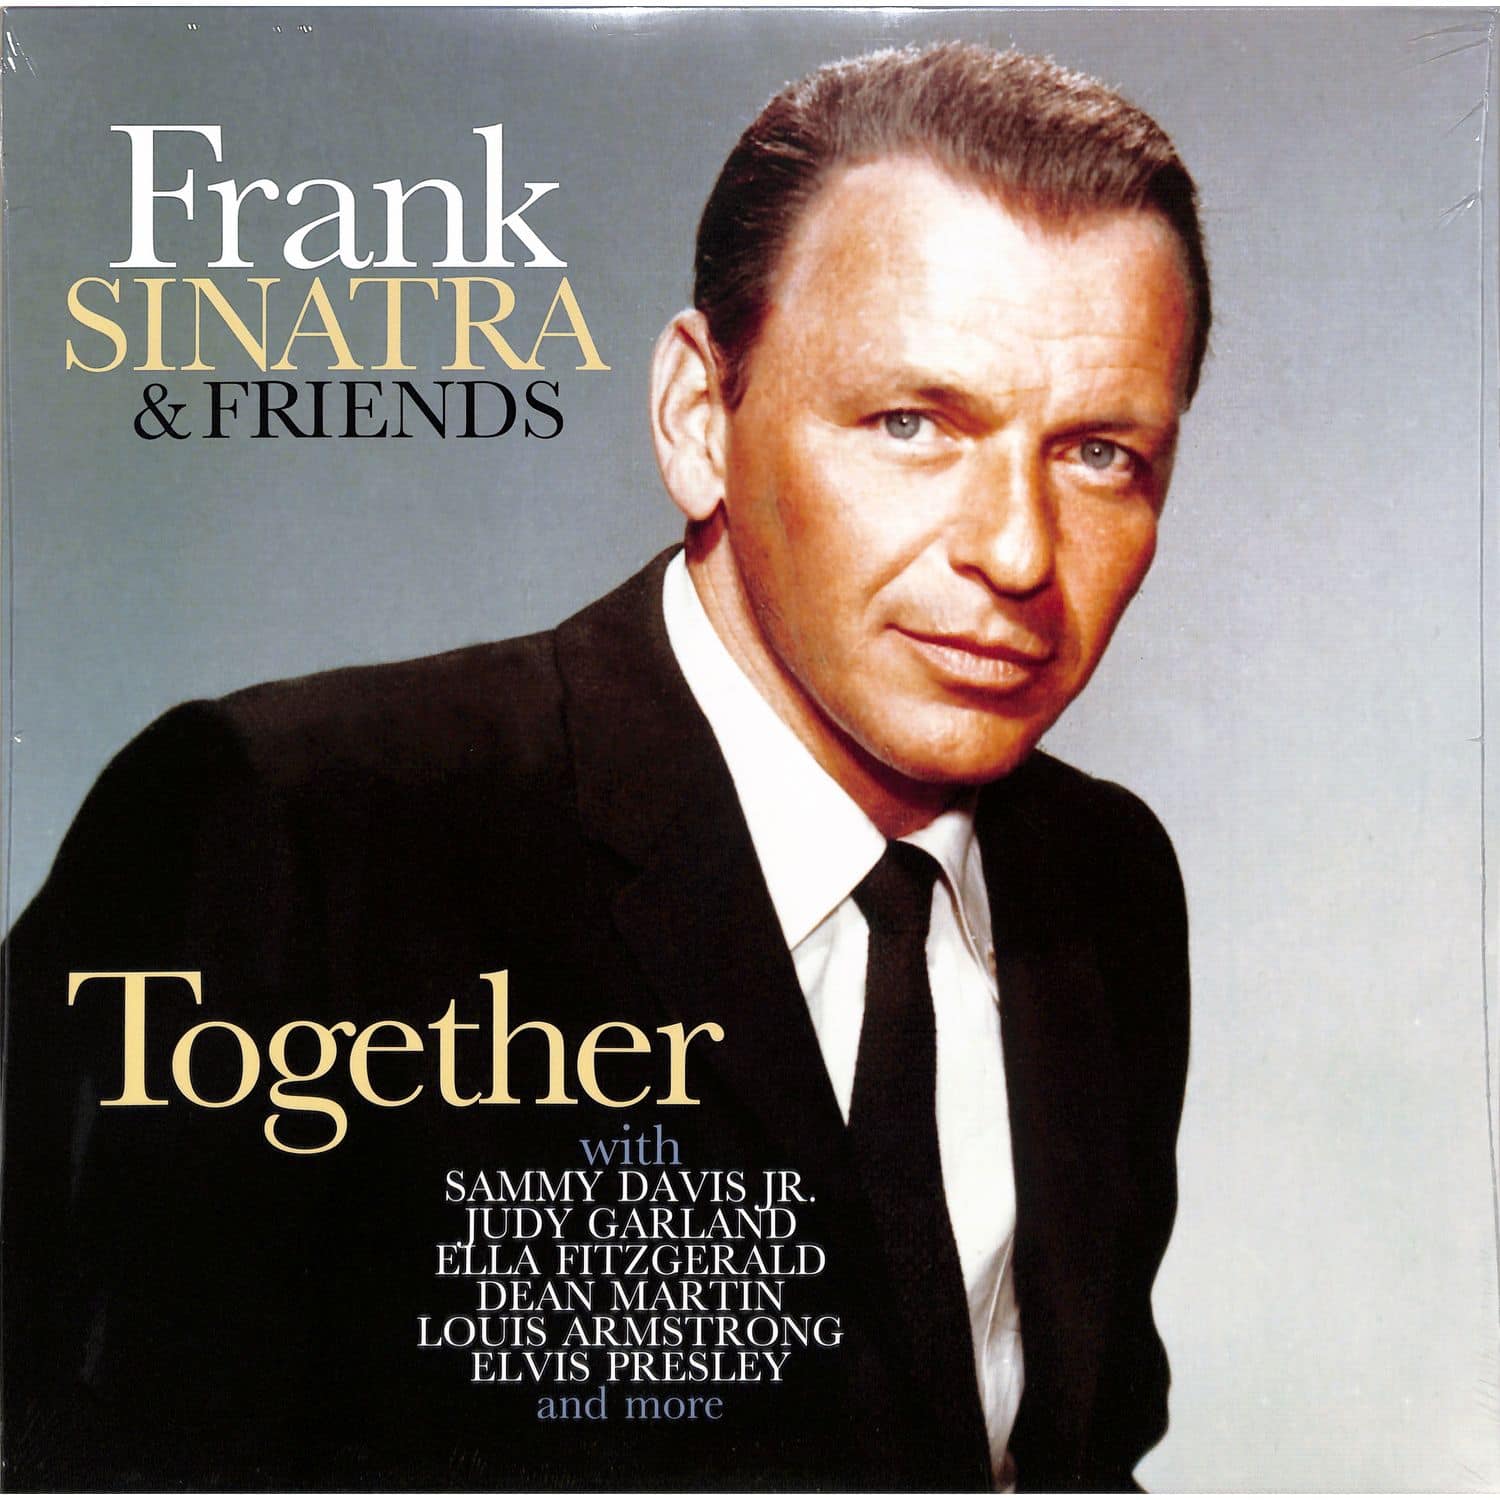 Frank Sinatra & Friends - TOGETHER: DUETS ON THE AIR & IN THE STUDIO 